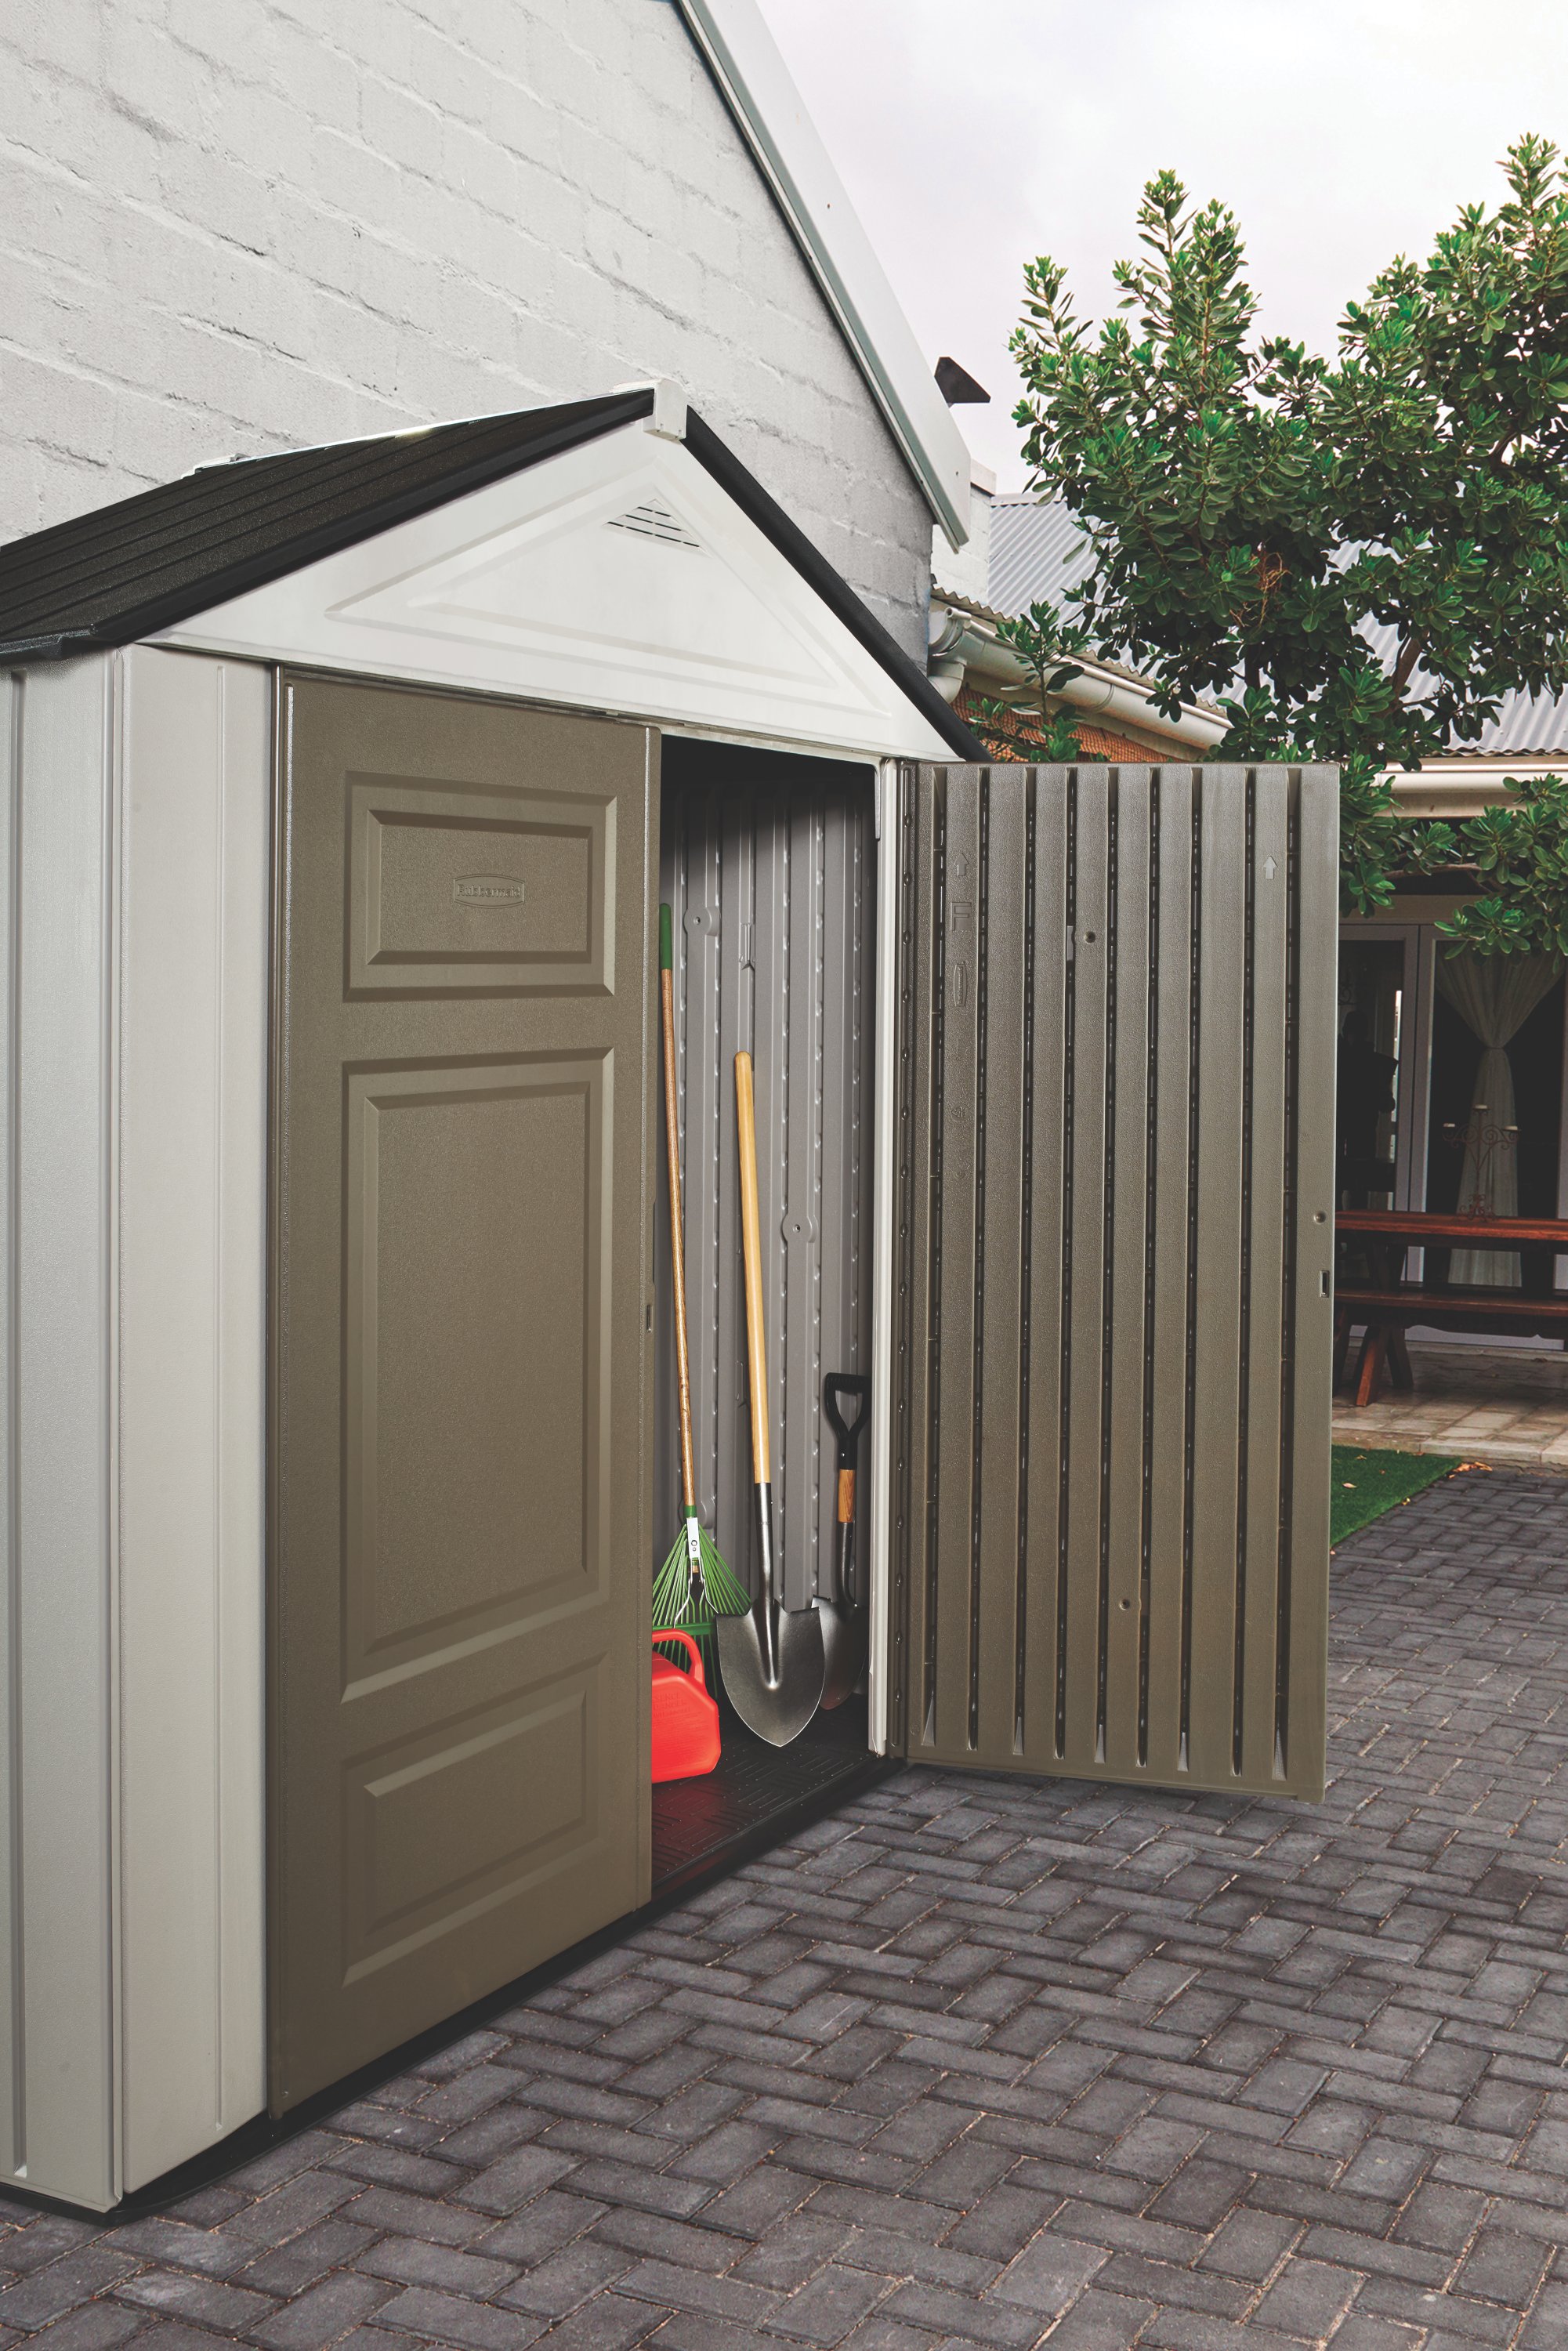 https://s7d9.scene7.com/is/image/NewellRubbermaid/2035897-ccs-outdoor-sheds-7x3-big-max-jr-canteen-brown-backyard-propped-right-door-open-close-up-into-shed-lifestyle-1